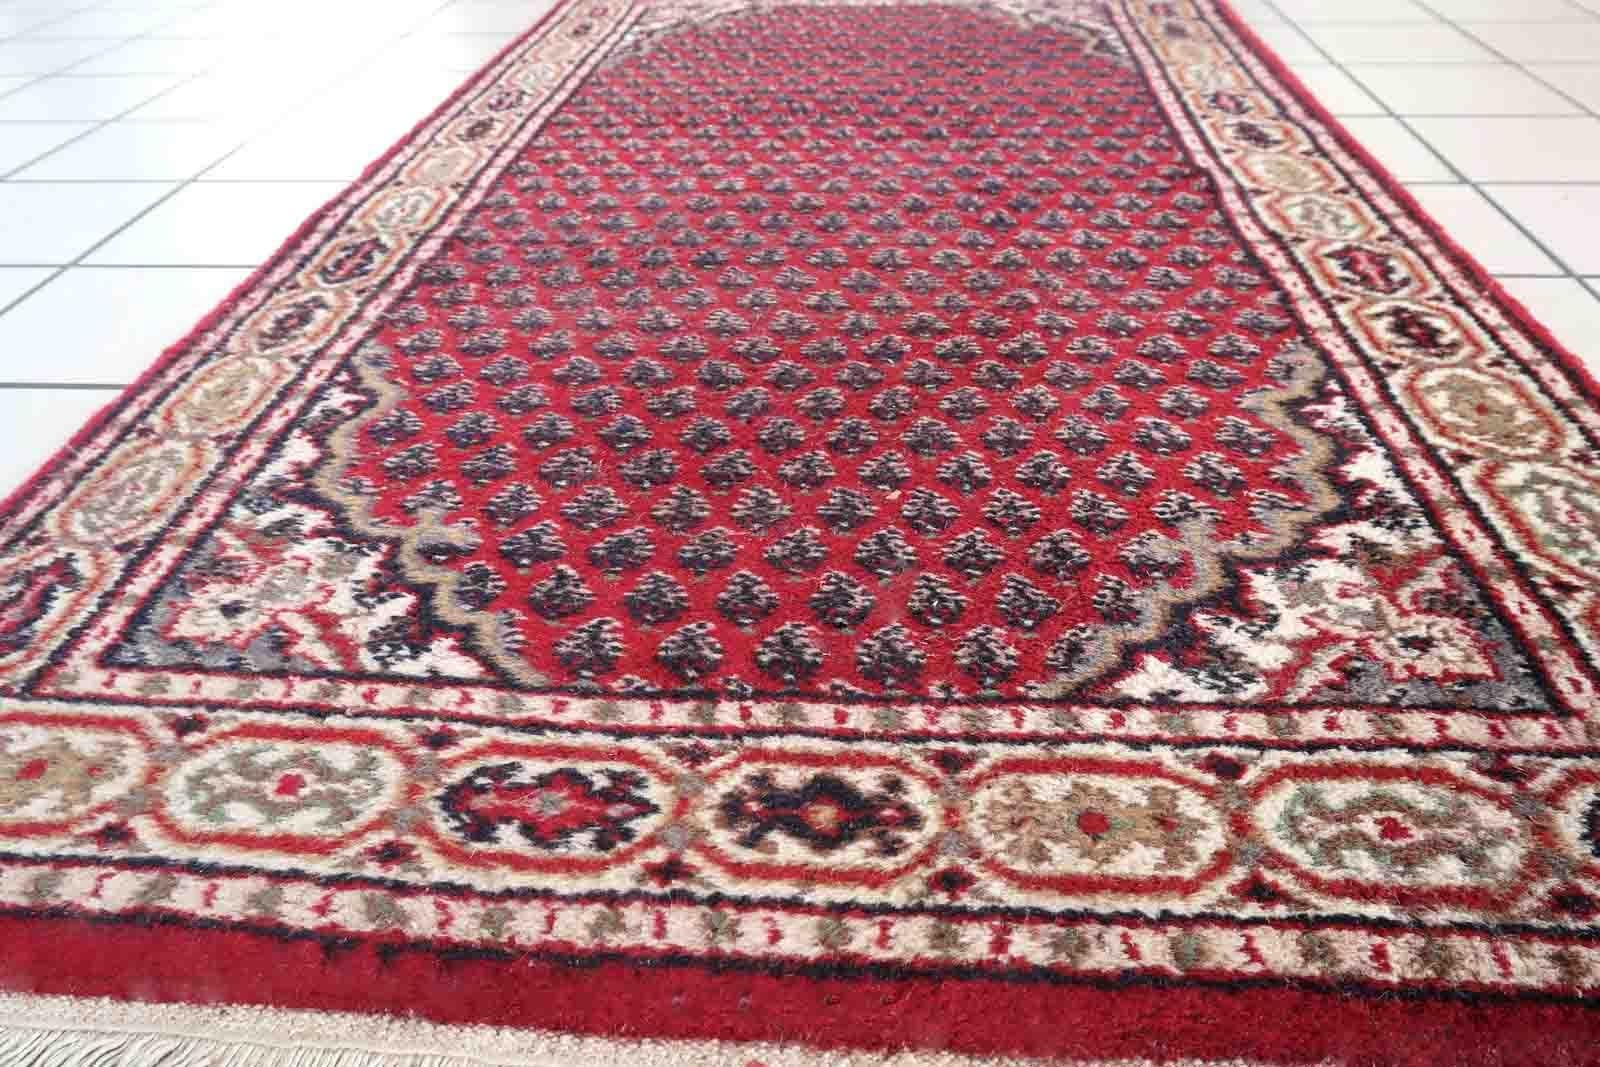 Handmade vintage Indian Seraband rug in traditional all-over design. The rug is form the end of 20th century in original good condition.

-condition: original good,

-circa: 1970s,

-size: 3' x 5.3' (94cm x 163cm),

-material: